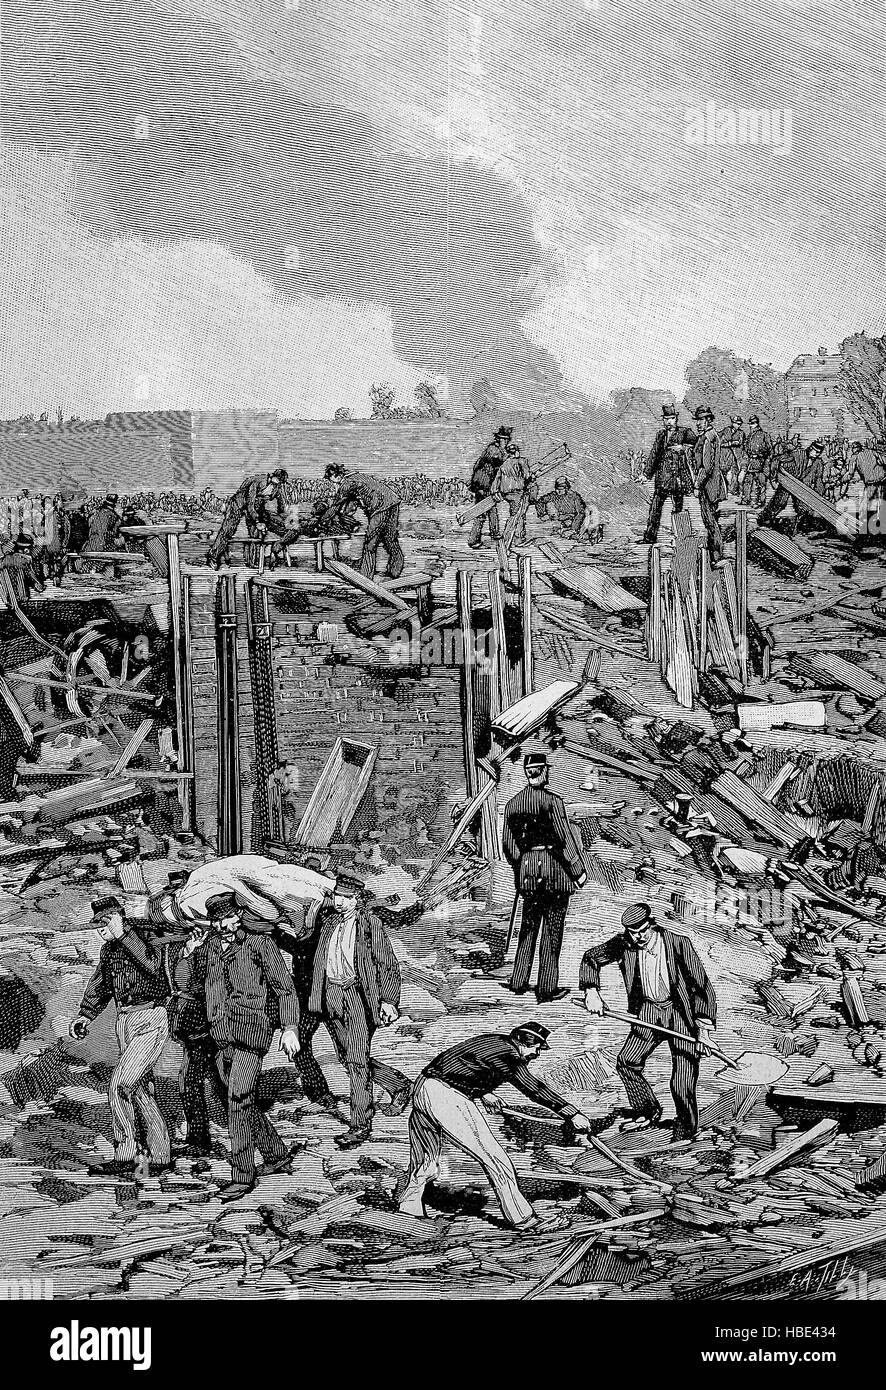 after the explosion of the ammunition factory of Corvilain, near Antwerp, Belgium, on September 6, 1889, illustration, woodcut from 1880 Stock Photo